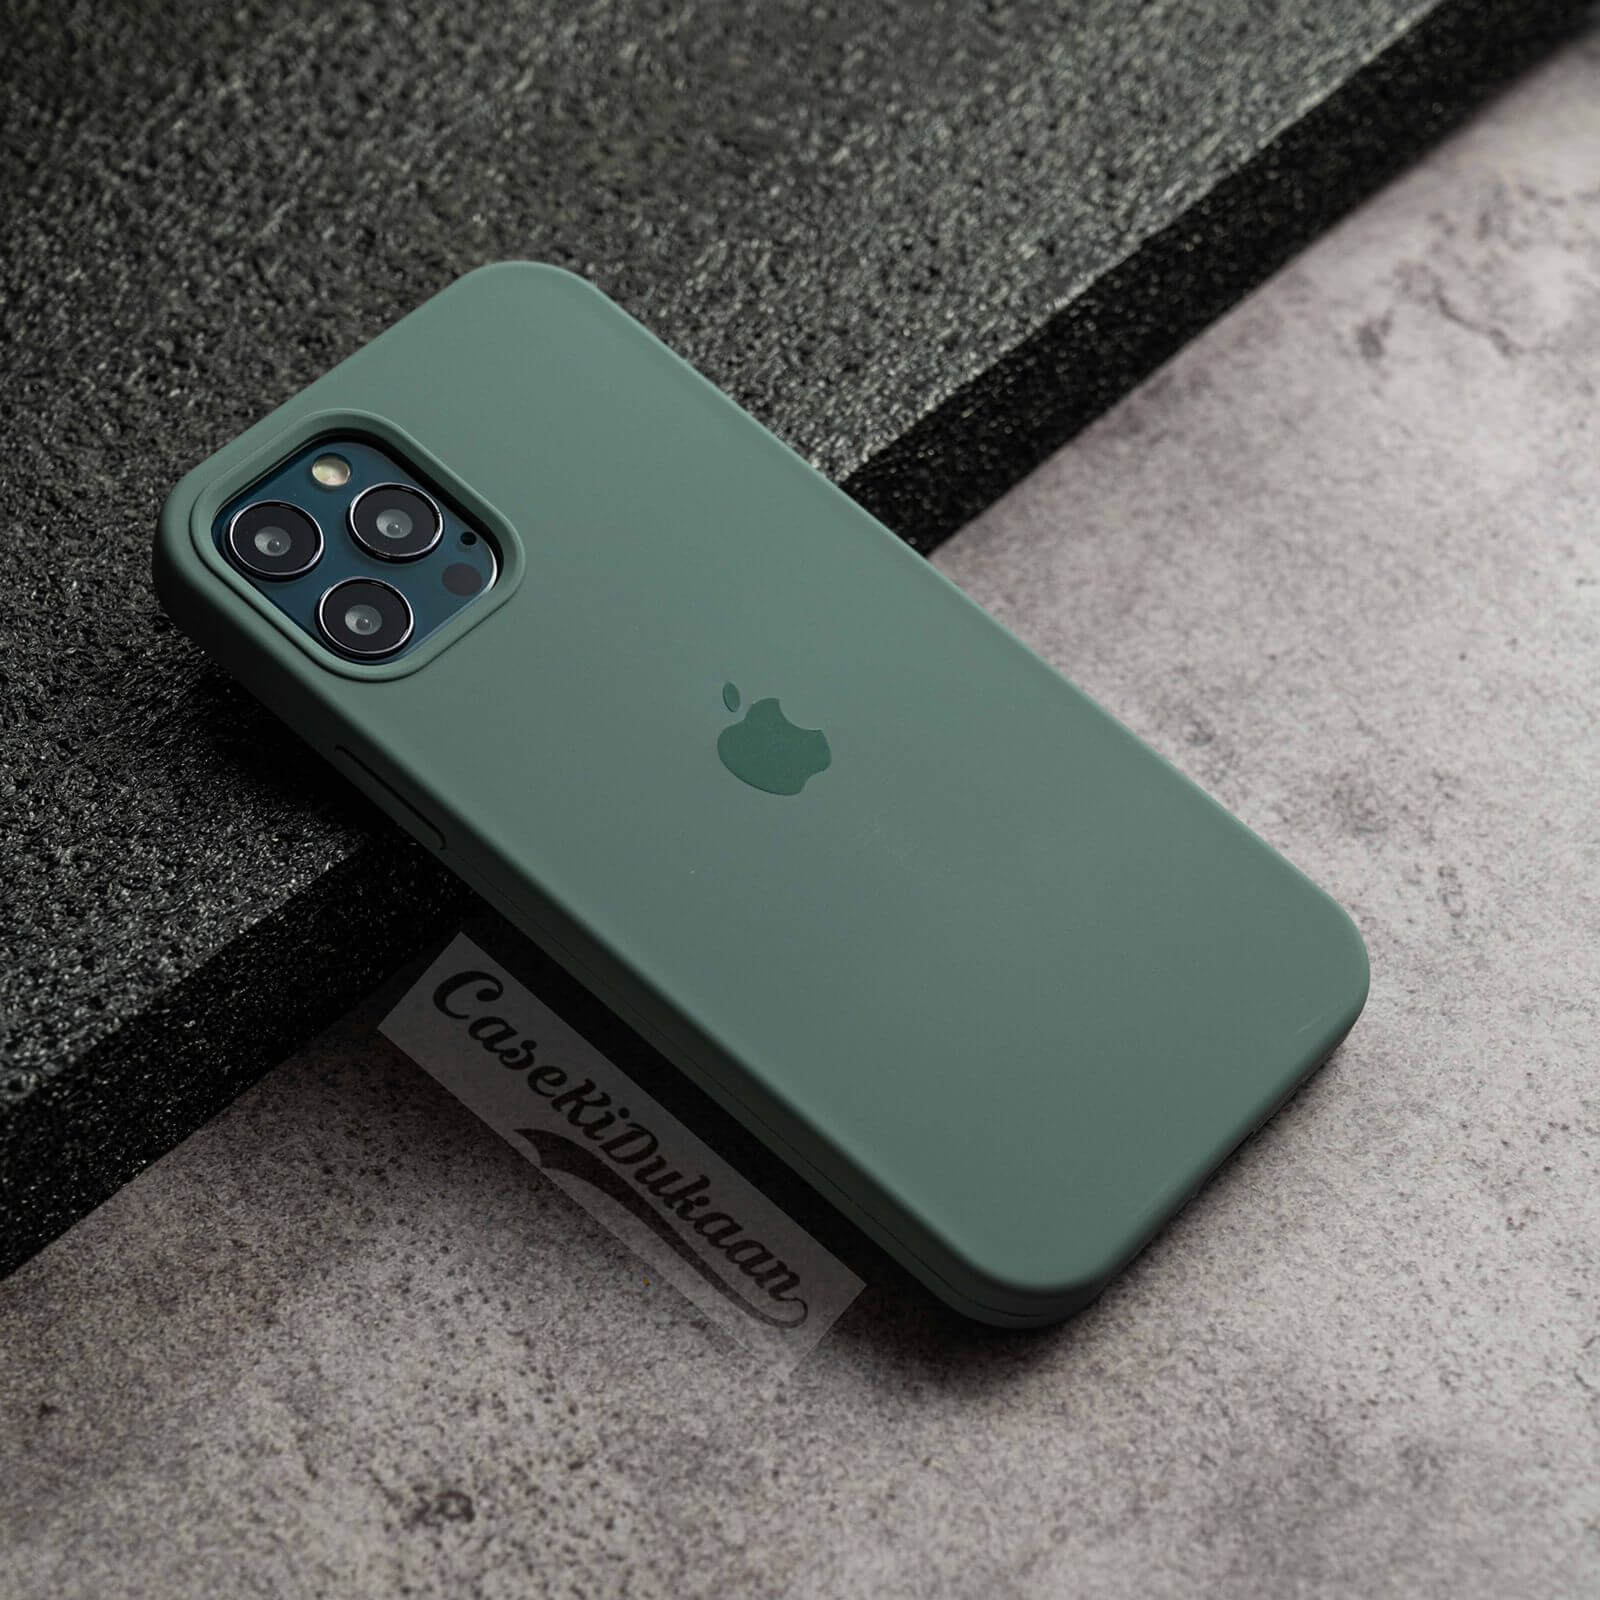 https://www.casekidukaan.com/image/cache/catalog/cases/silicone/13%20pro/Midnight%20Green%20Silicon%20Case%20For%20iPhone%2013%20Pro-1600x1600.jpeg